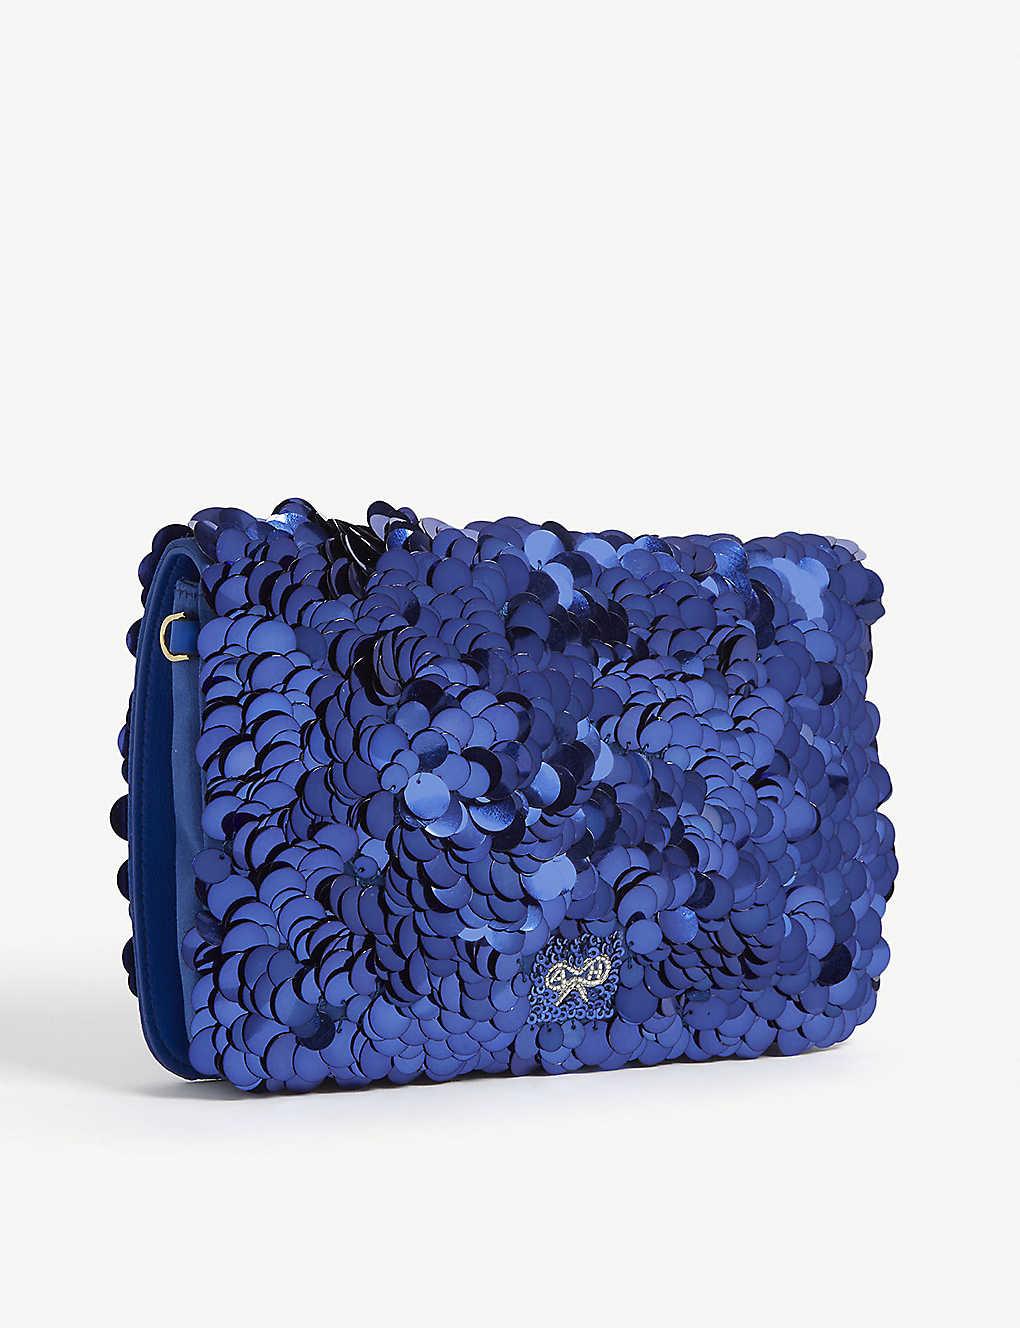 Anya Hindmarch Walkers Sequin Clutch Bag in Blue | Lyst